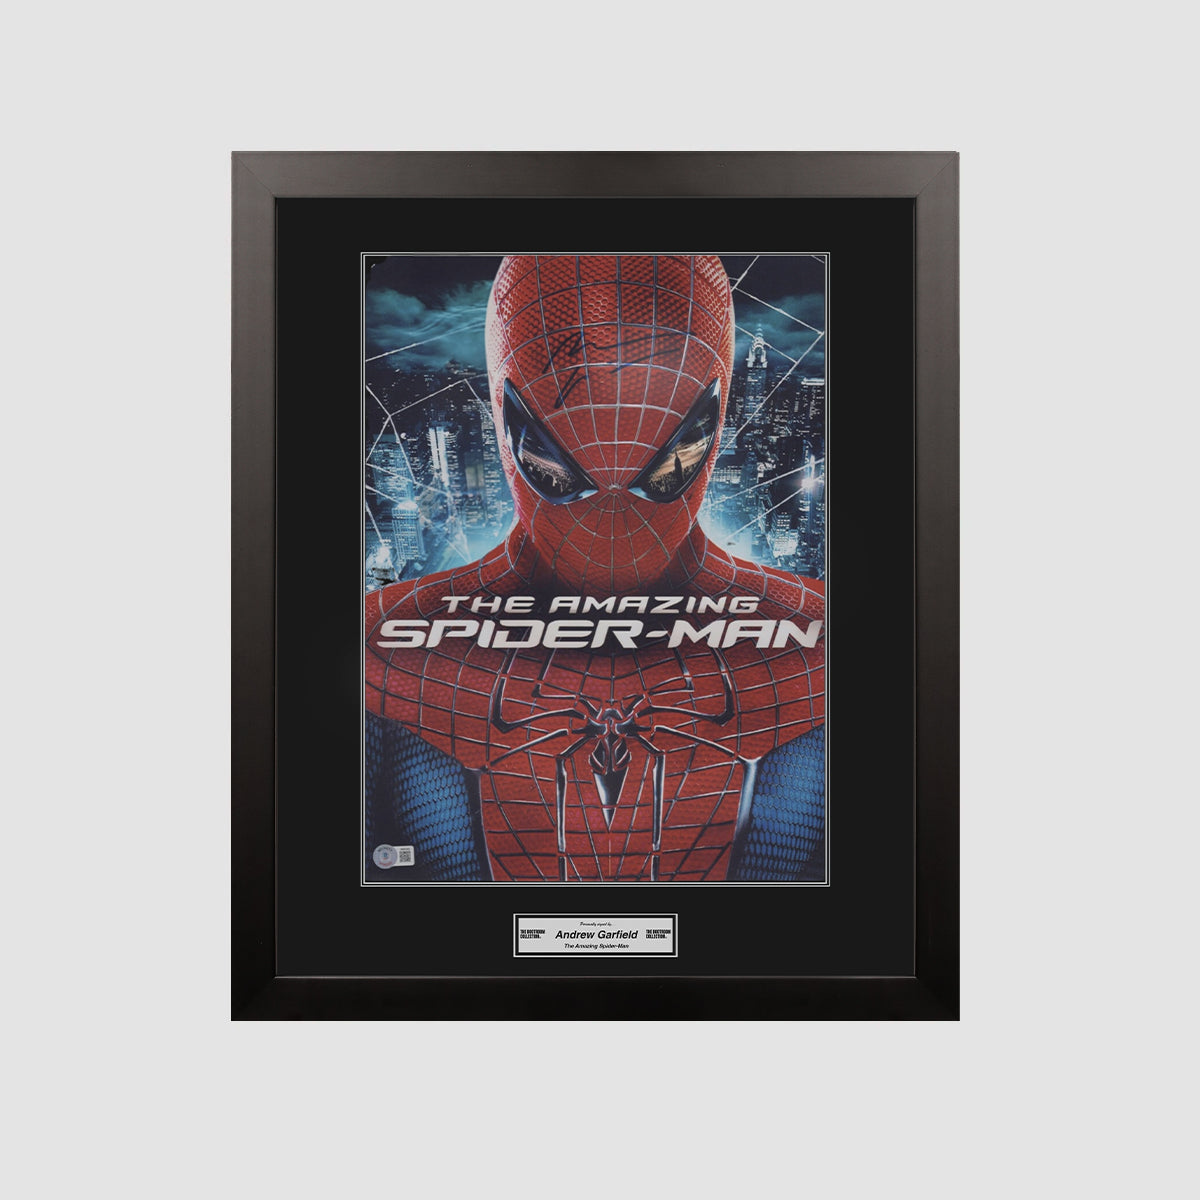 Andrew Garfield Signed The Amazing Spider-Man Poster